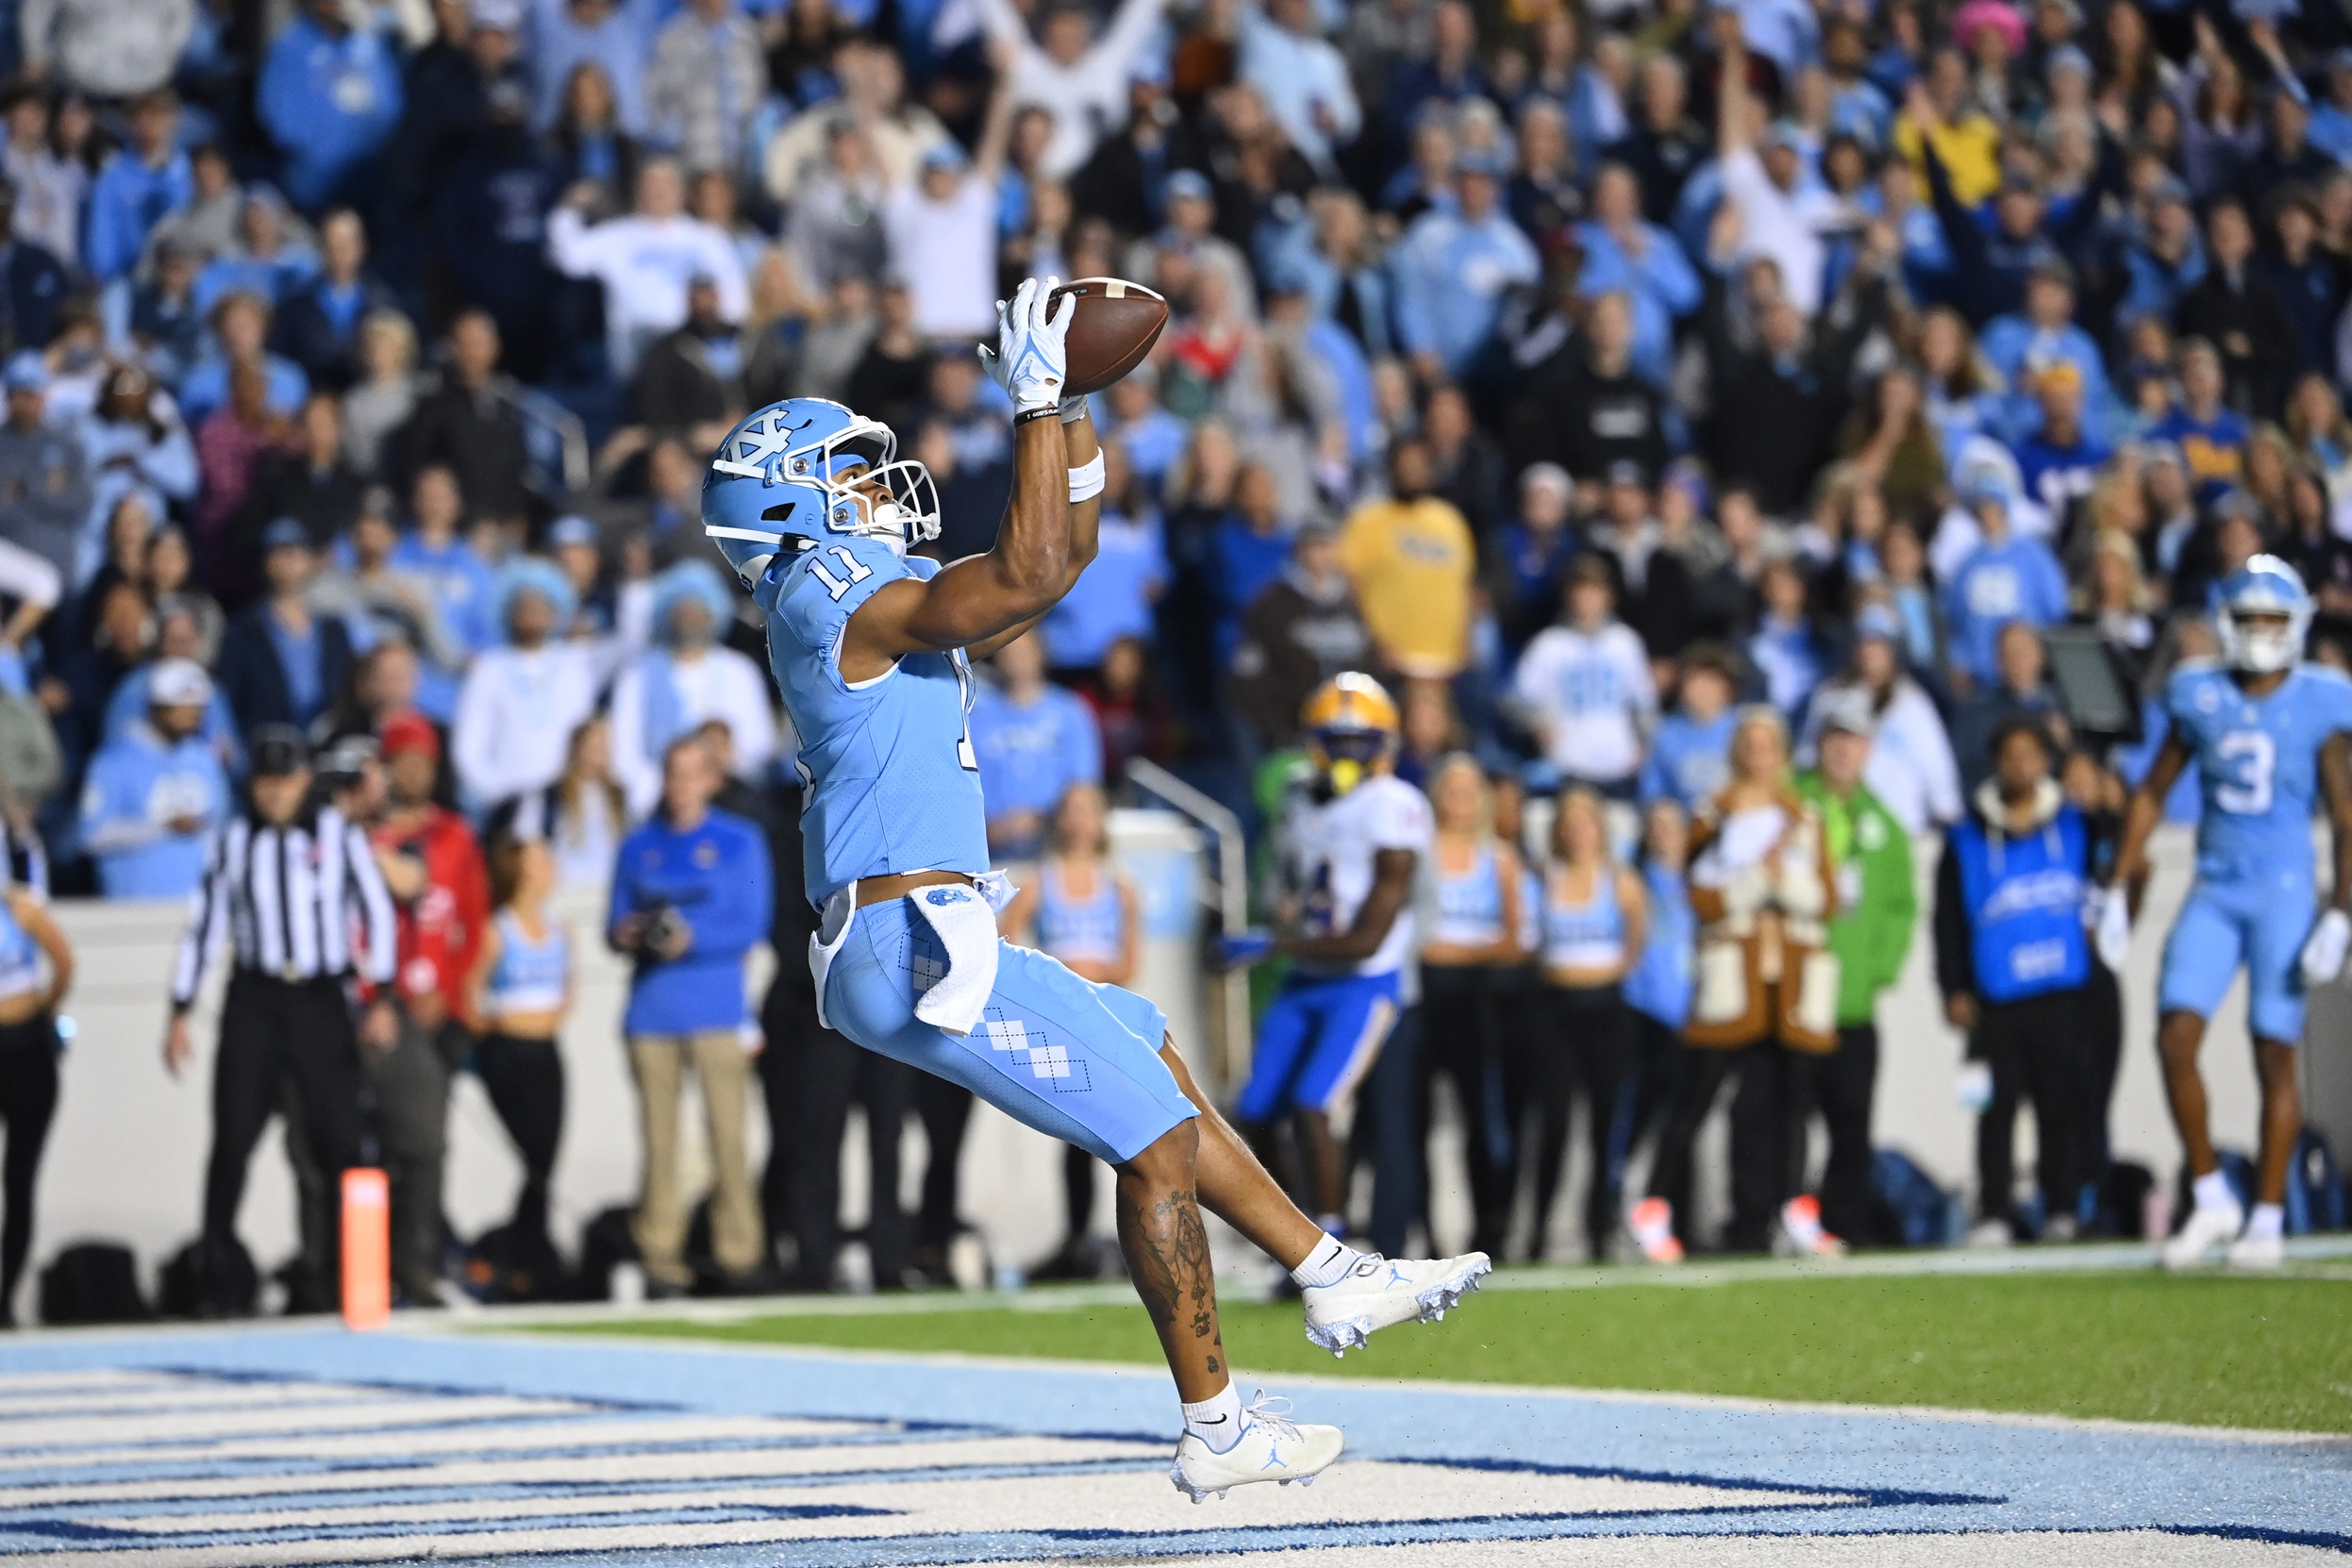 North Carolina Tar Heels wide receiver Josh Downs (11) catches a touchdown pass in the fourth quarter at Kenan Memorial Stadium.